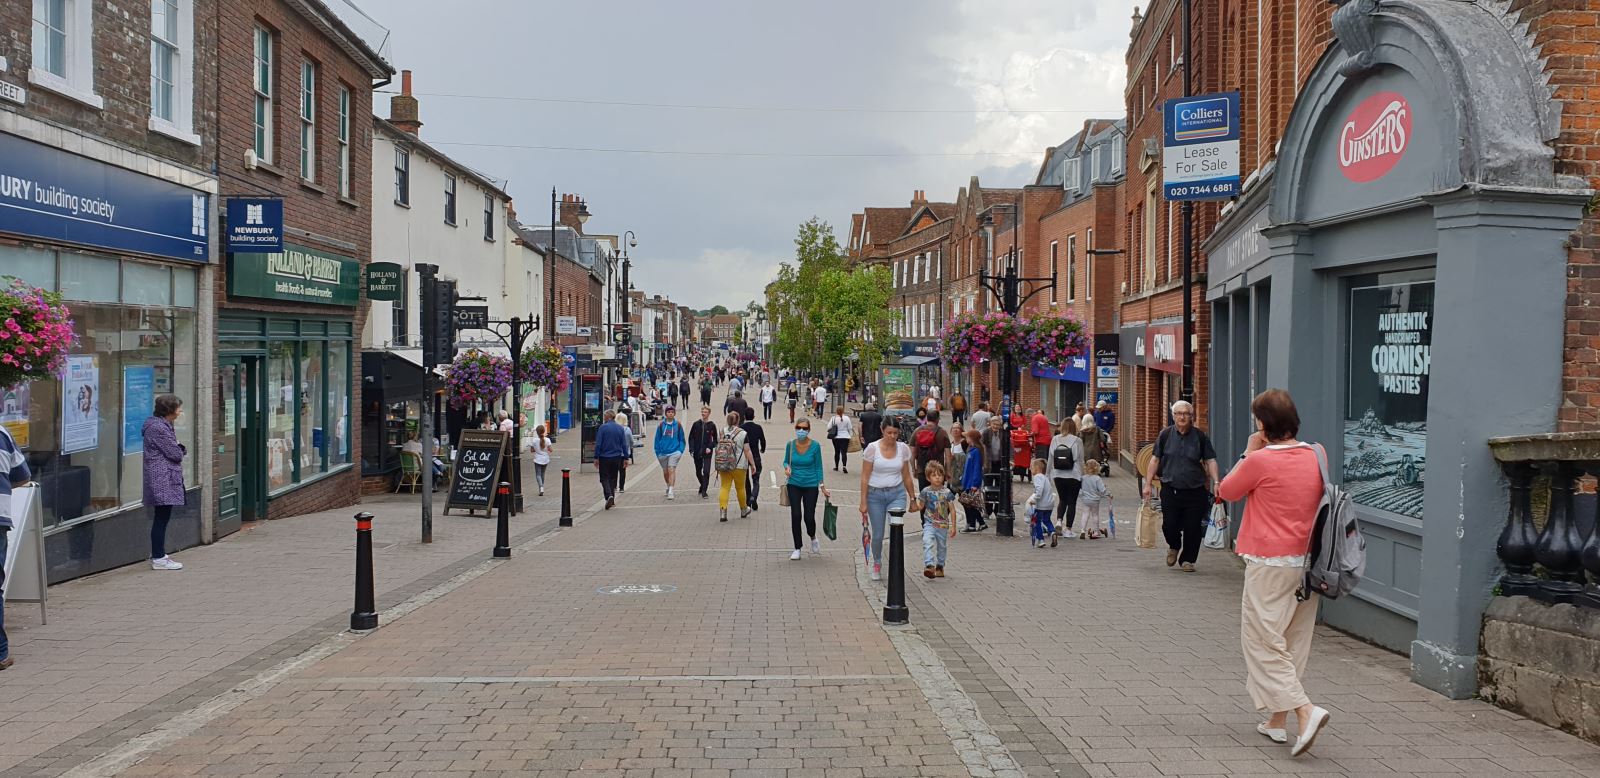 Northbrook high street in Newbury with people and shops